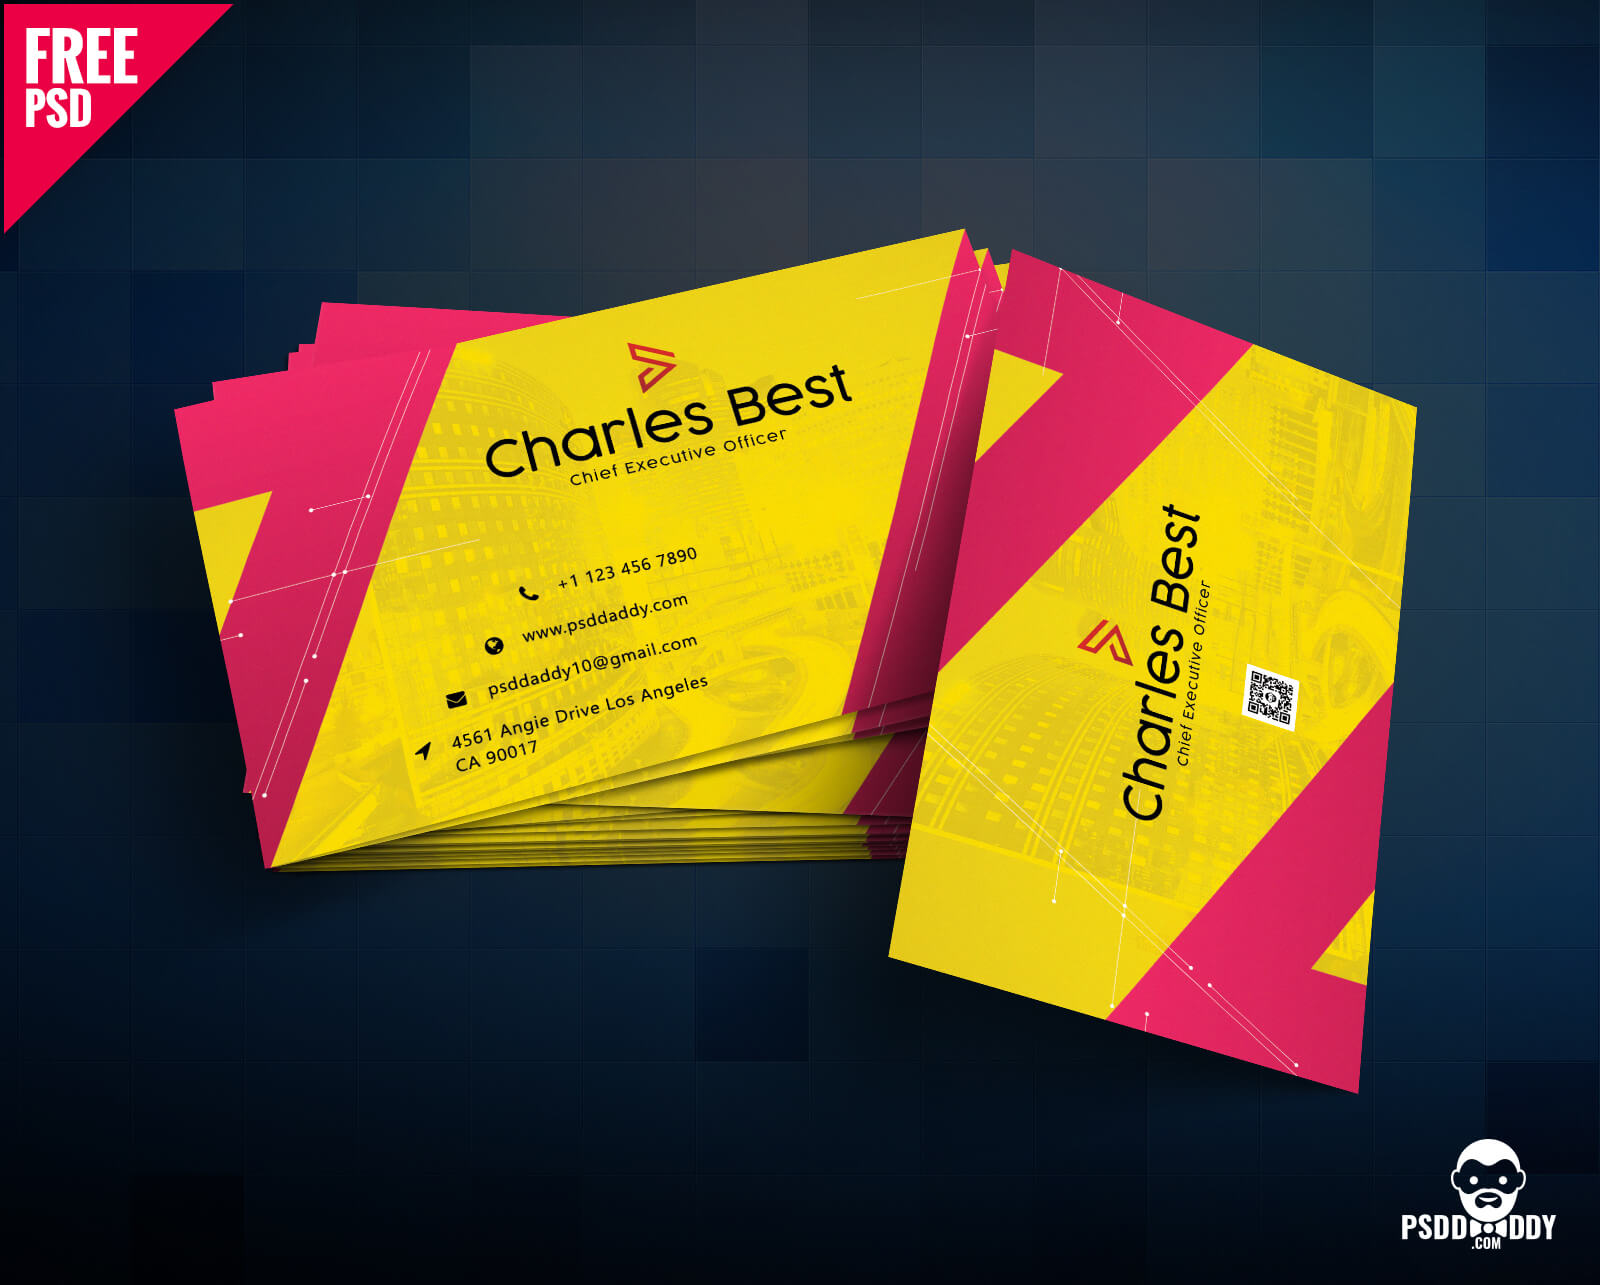 Download] Creative Business Card Free Psd | Psddaddy Regarding Photoshop Business Card Template With Bleed